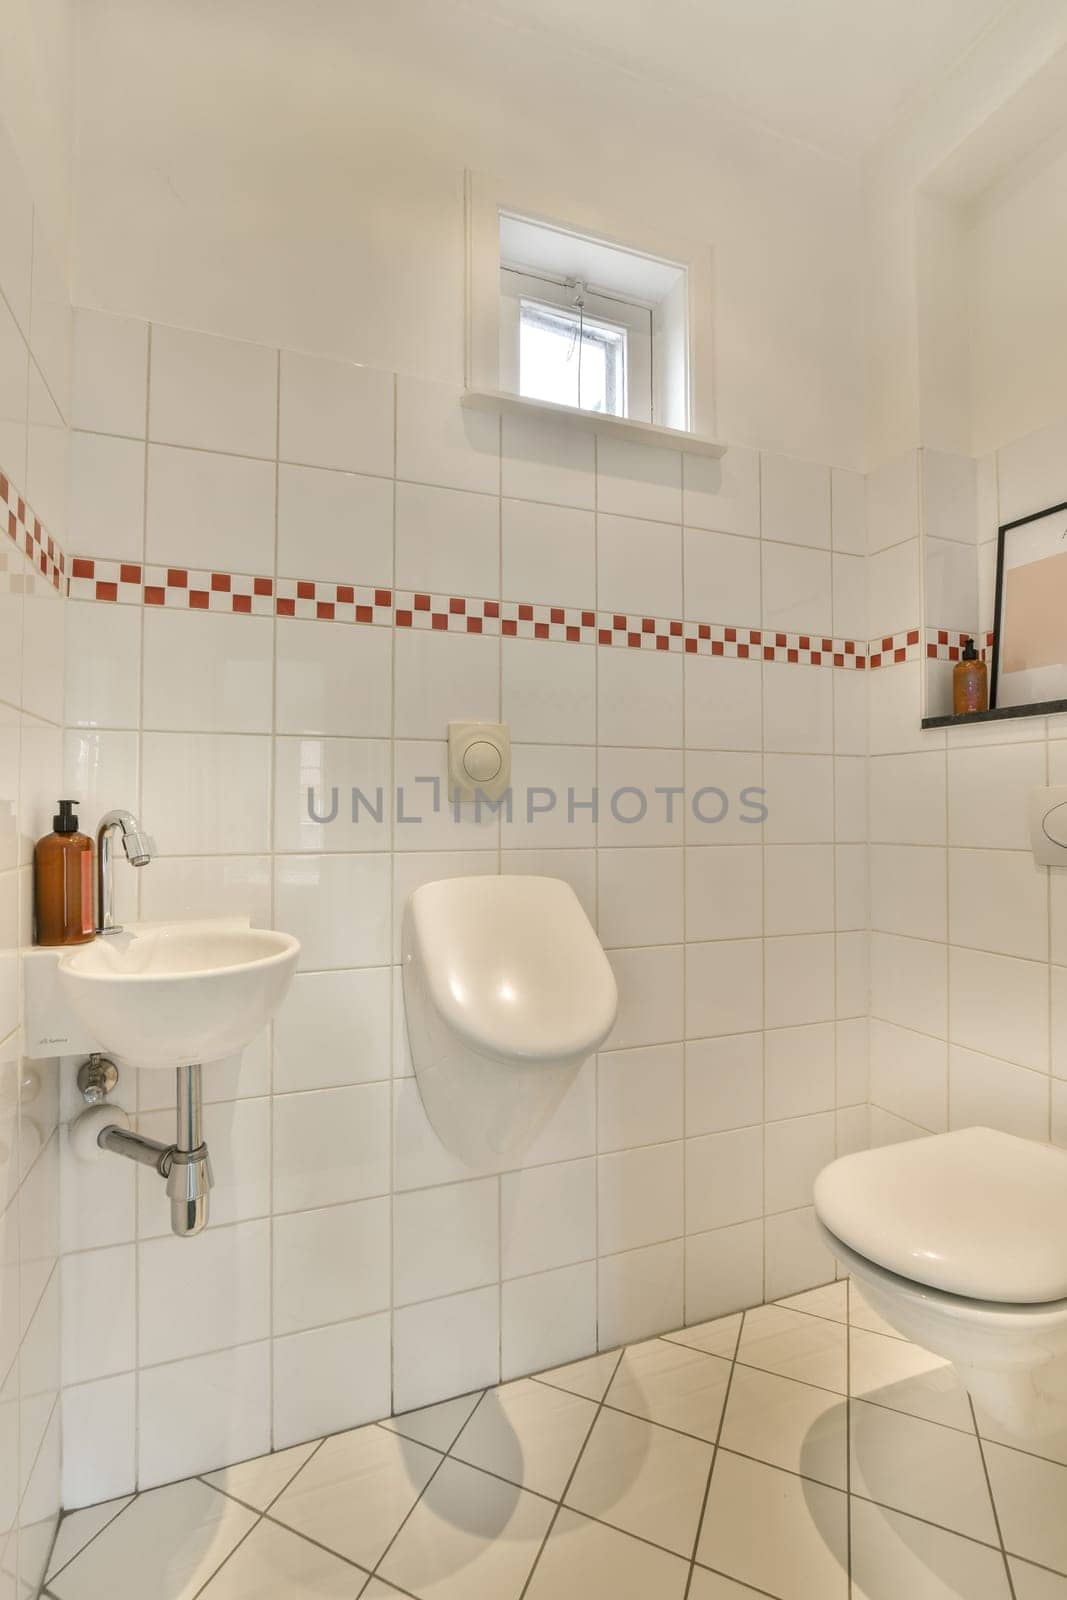 a bathroom with red and white tiles on the walls, toilet bowl, sink basin and mirror in the corner